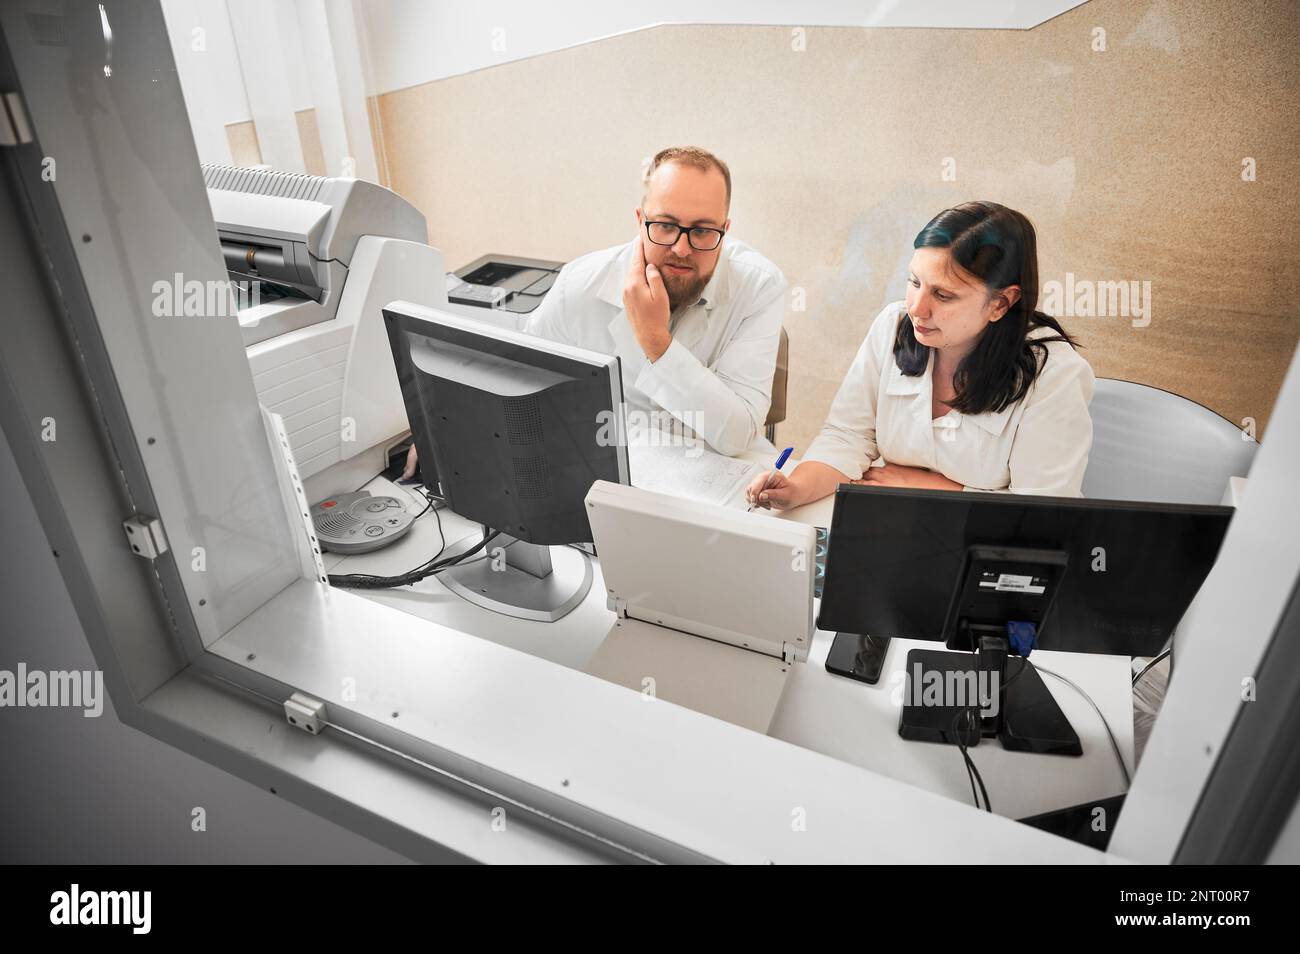 Medical computed tomography or MRI scanner. Side view of two specialists sitting at computer, working in hospital. Doctors looking at MRI results. Concept of medicine and healthcare. Stock Photo